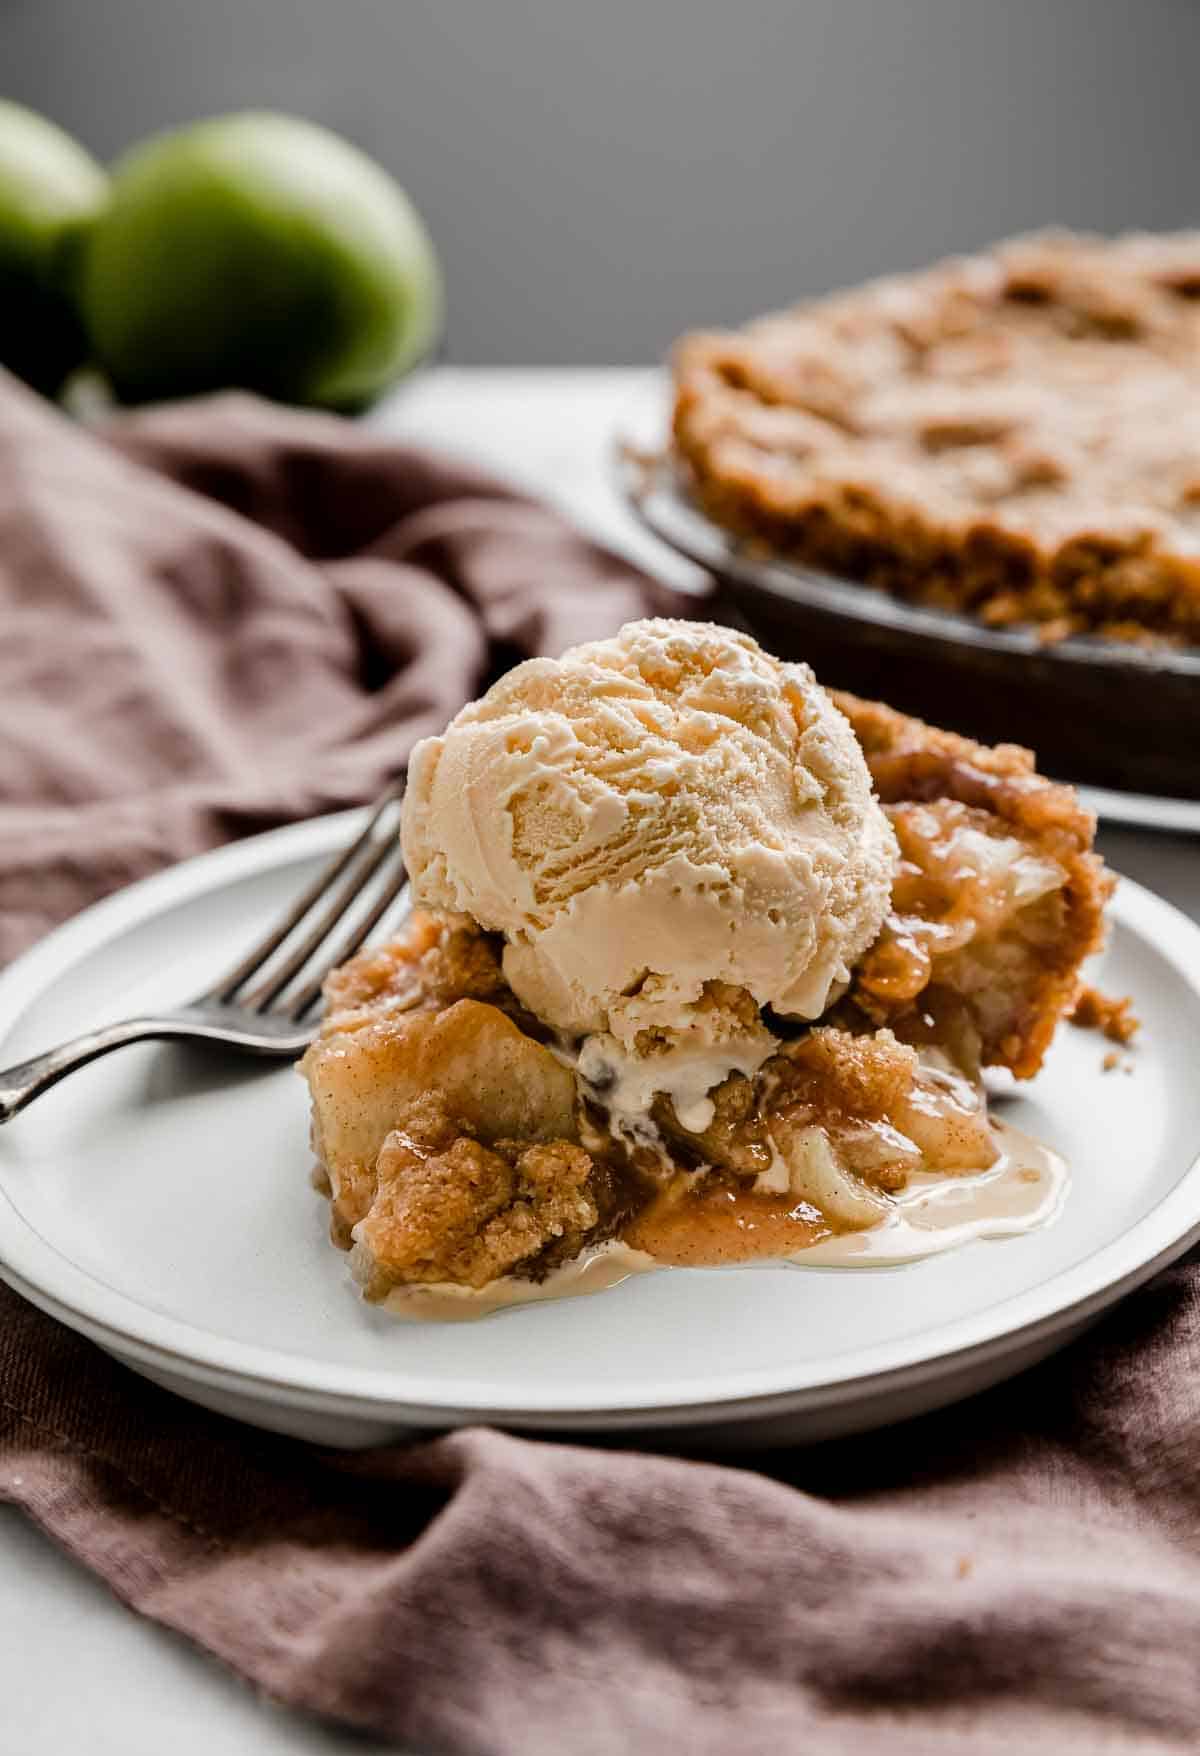 A slice of Apple Pie with Graham Cracker Crust on a white plate with the full apple pie in the background.